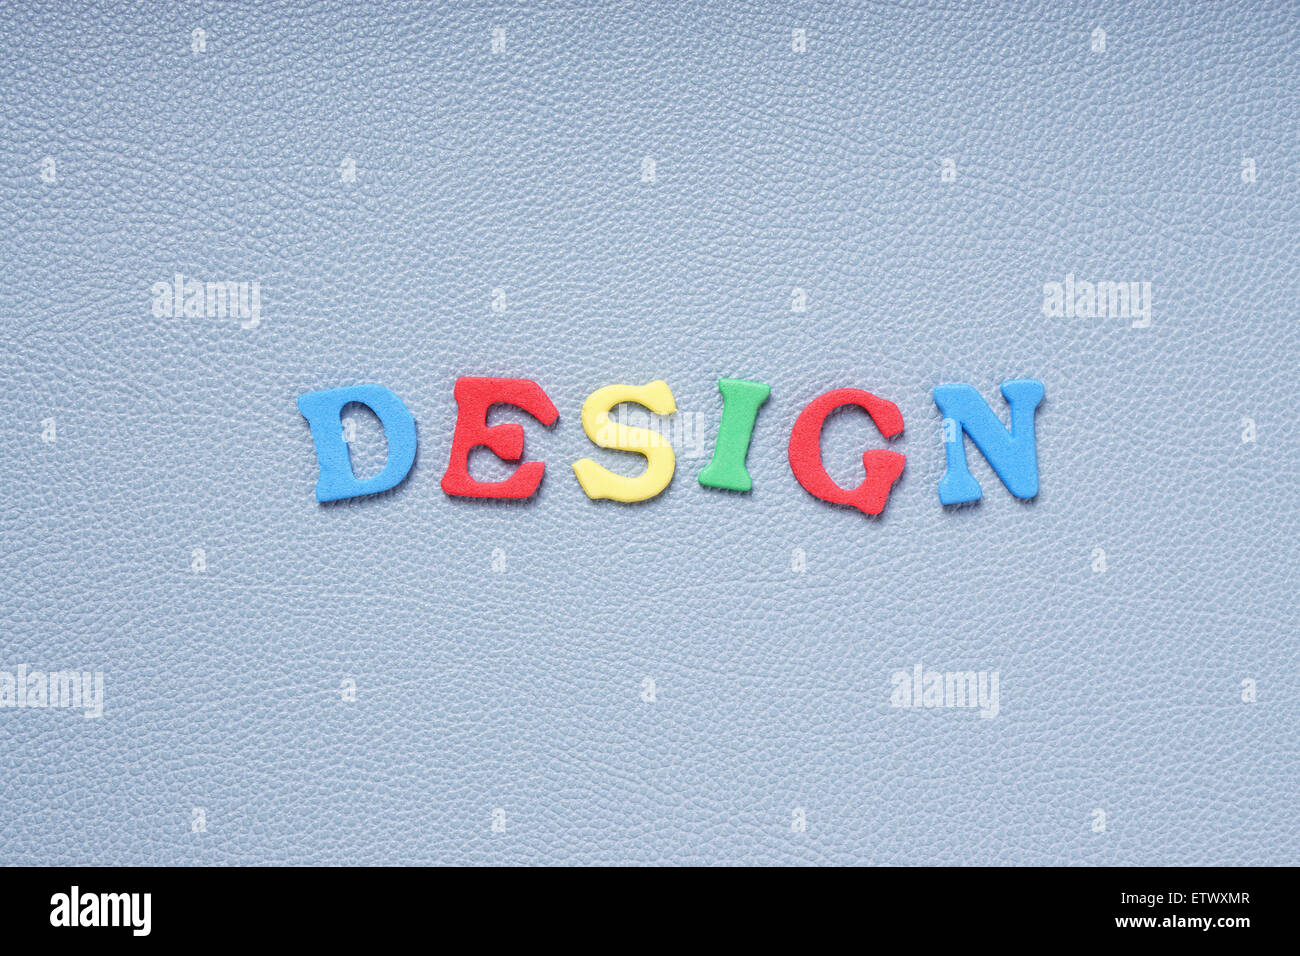 design in colorful letters Stock Photo